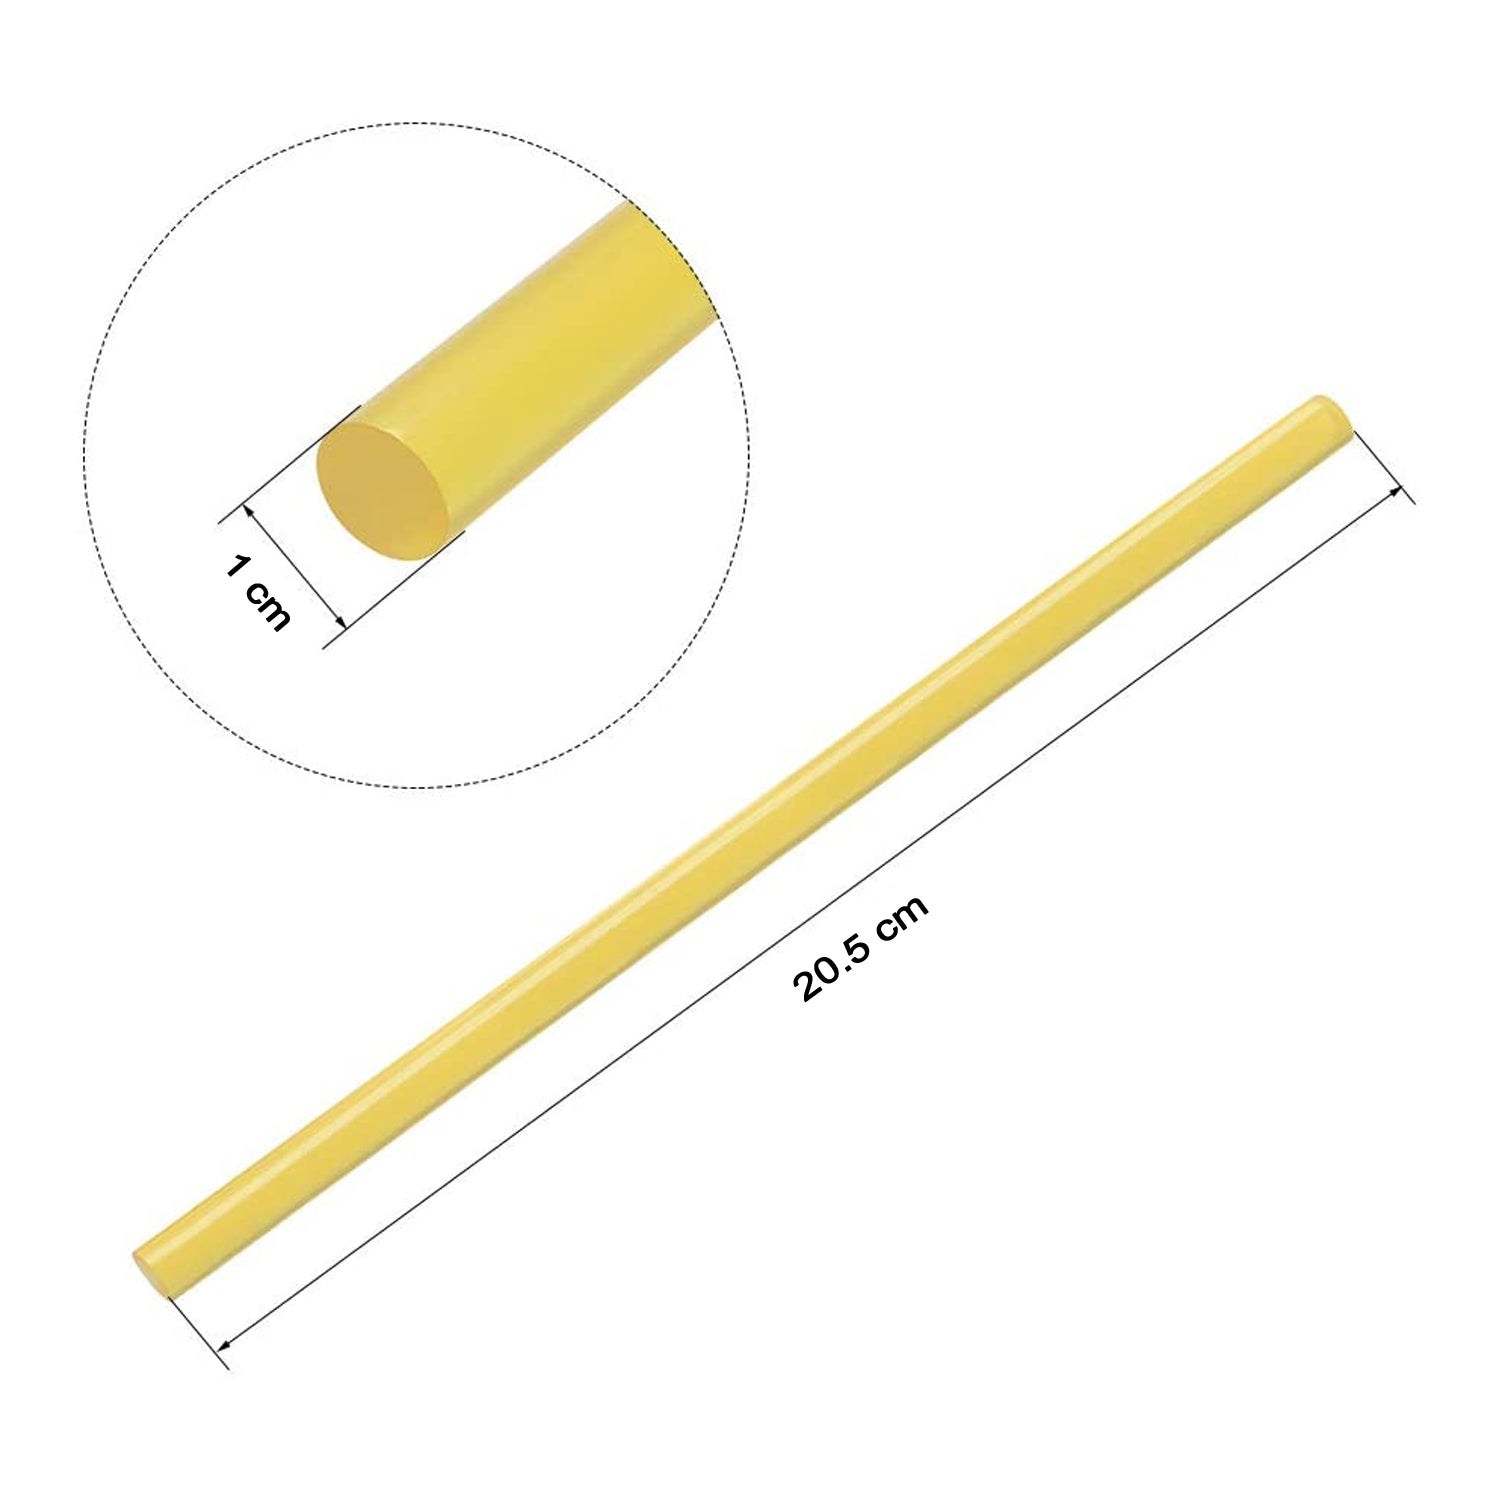 0463 Hot Melt Electric Heating Glue Stick Flexible for DIY, Sealing and Quick Repairs (1 pc) (11mm) DeoDap